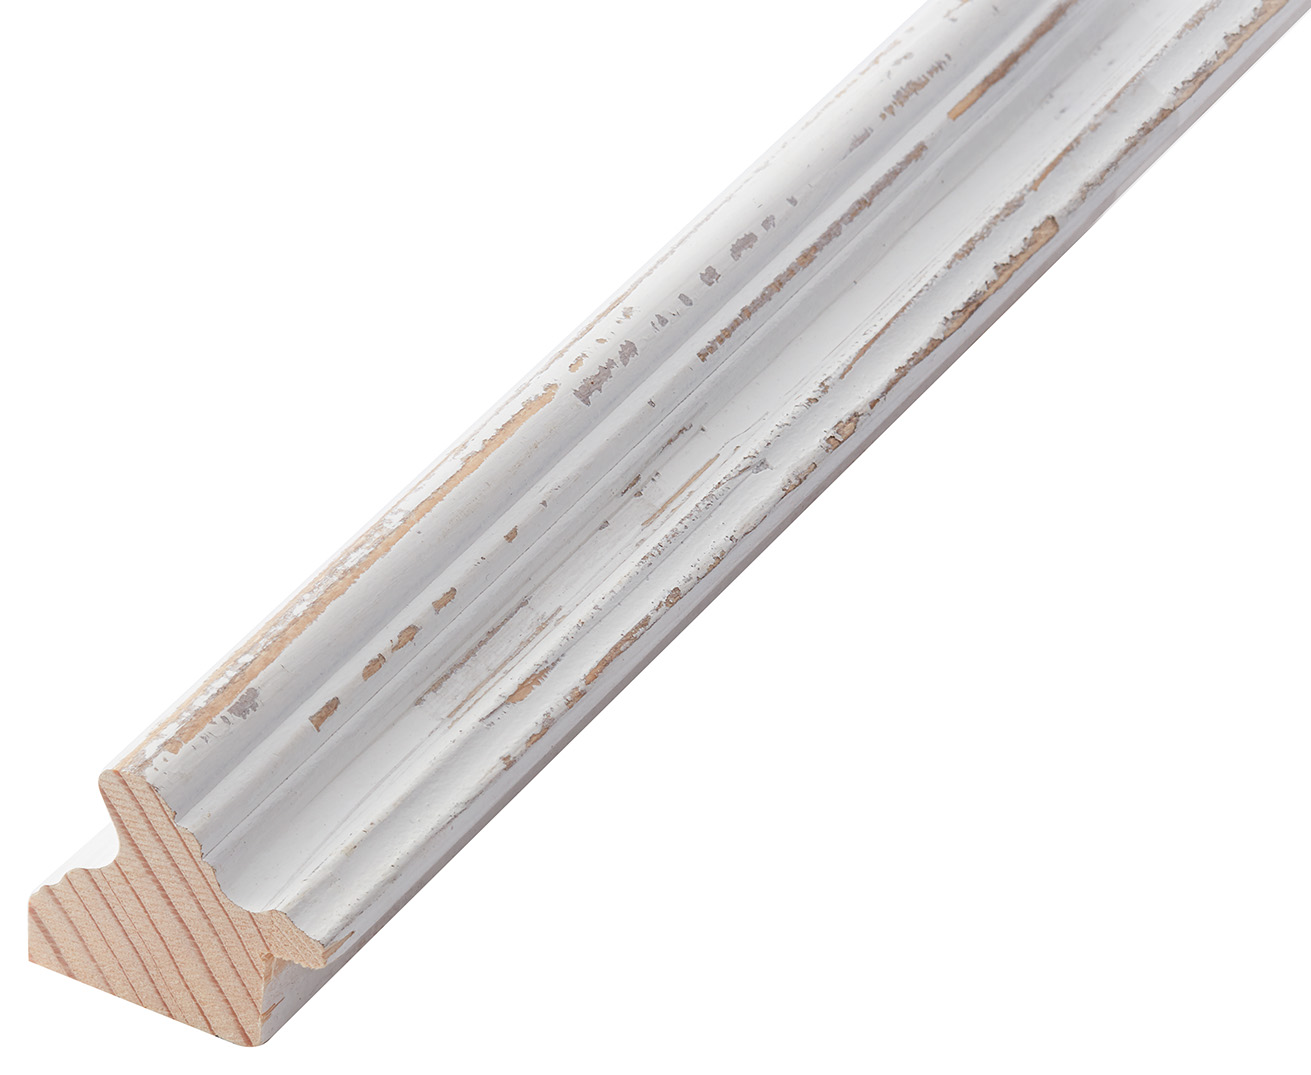 Moulding finger-jointed fir Width 36mm - White, distressed